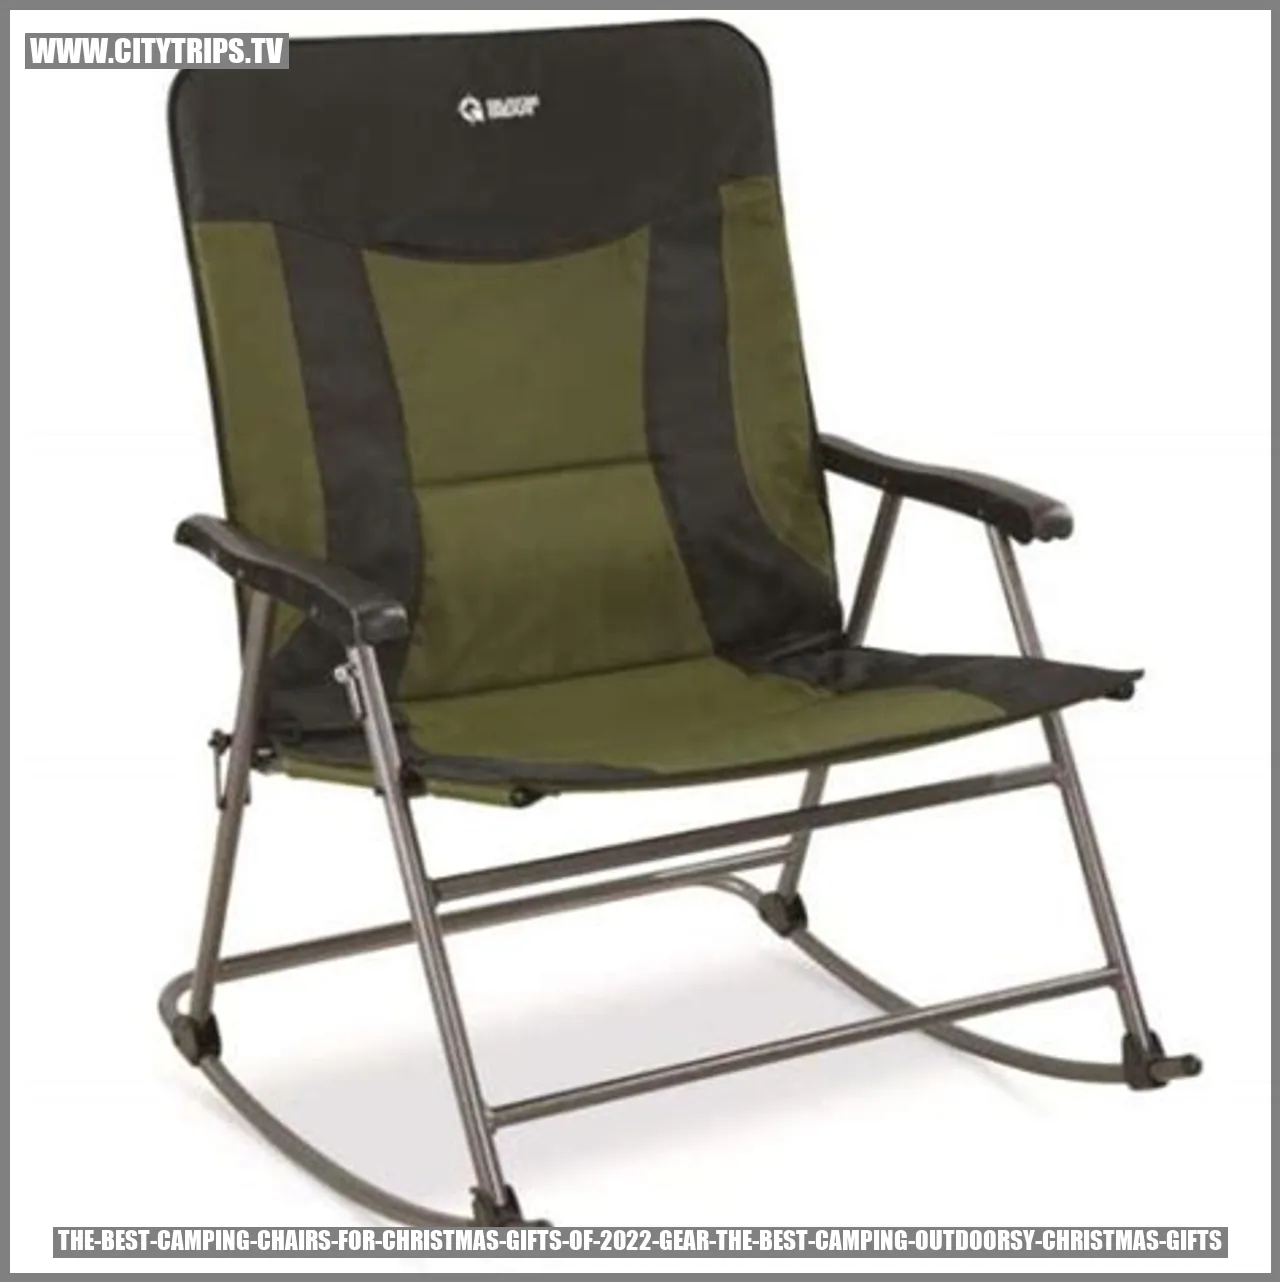 image of camping chairs for Christmas gifts of 2022